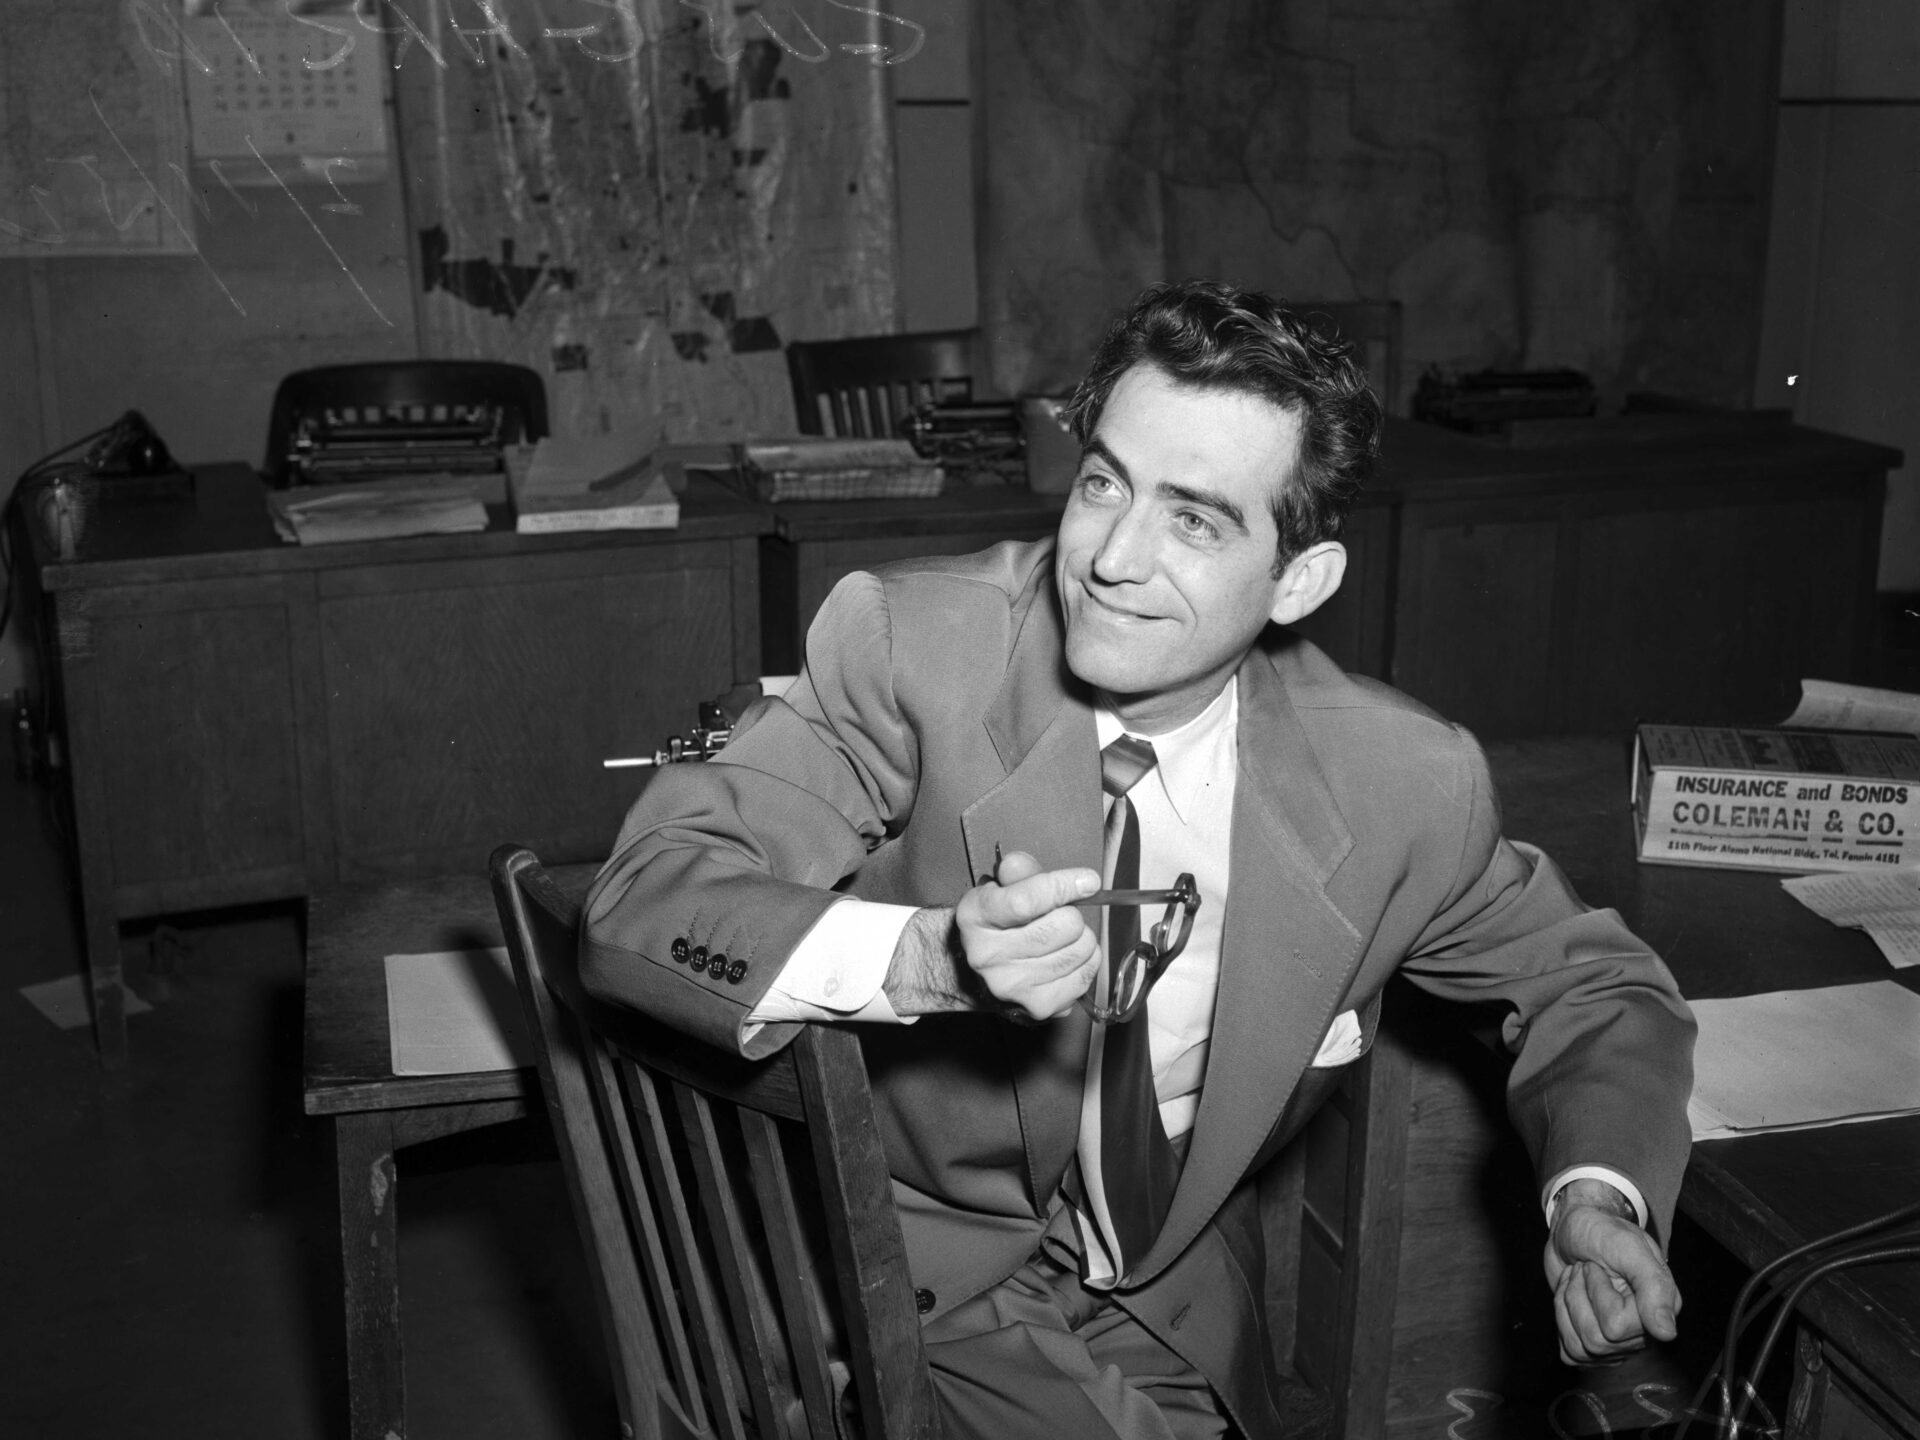 Black and white photograph from 1953 of attorney Gustavo Garcia sitting at a desk in his office.